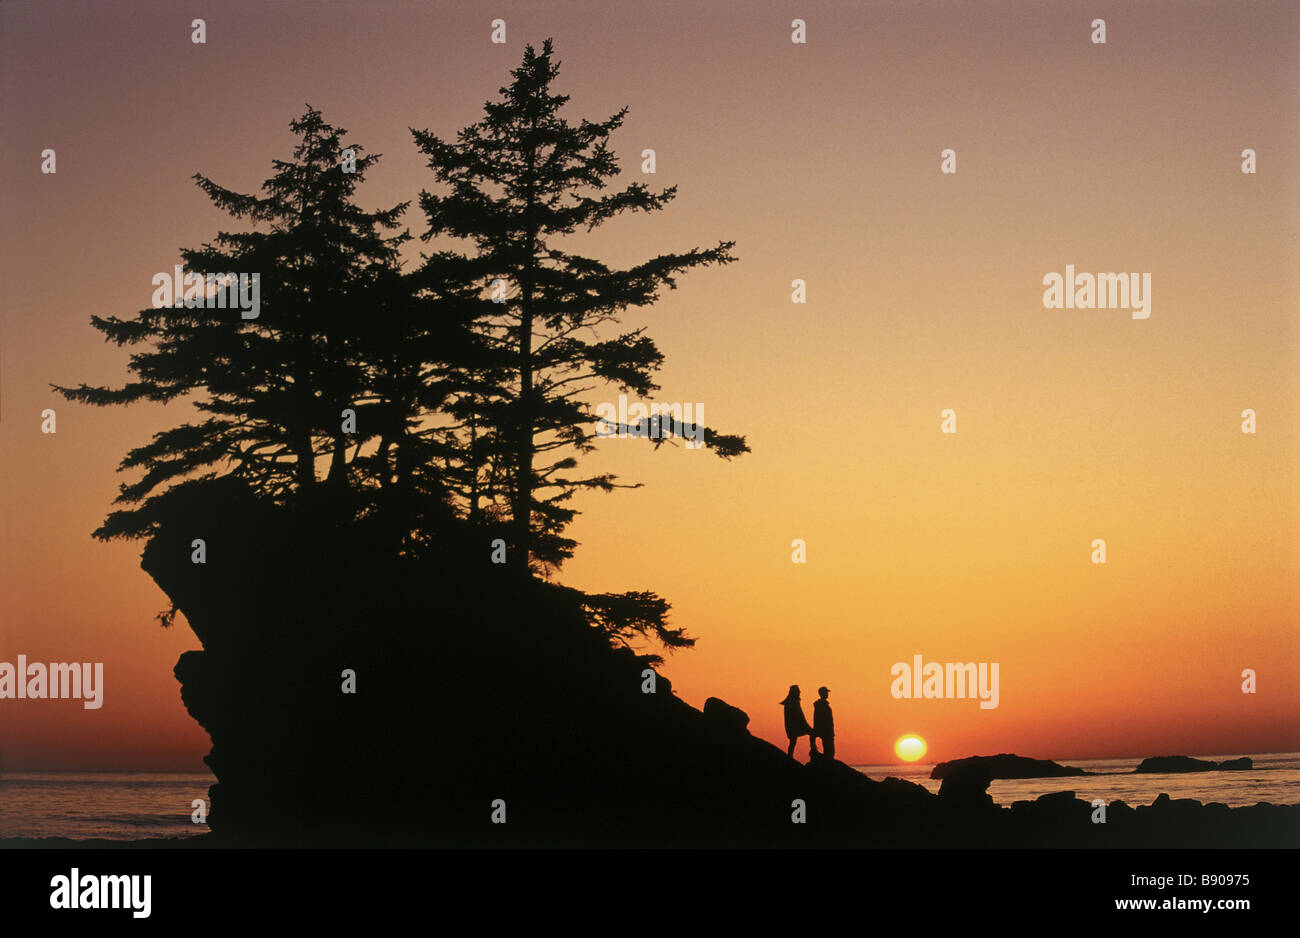 Concepts # FL0574, D Nunuk; Silhouette, Two People, Trees, Sunset Stock Photo